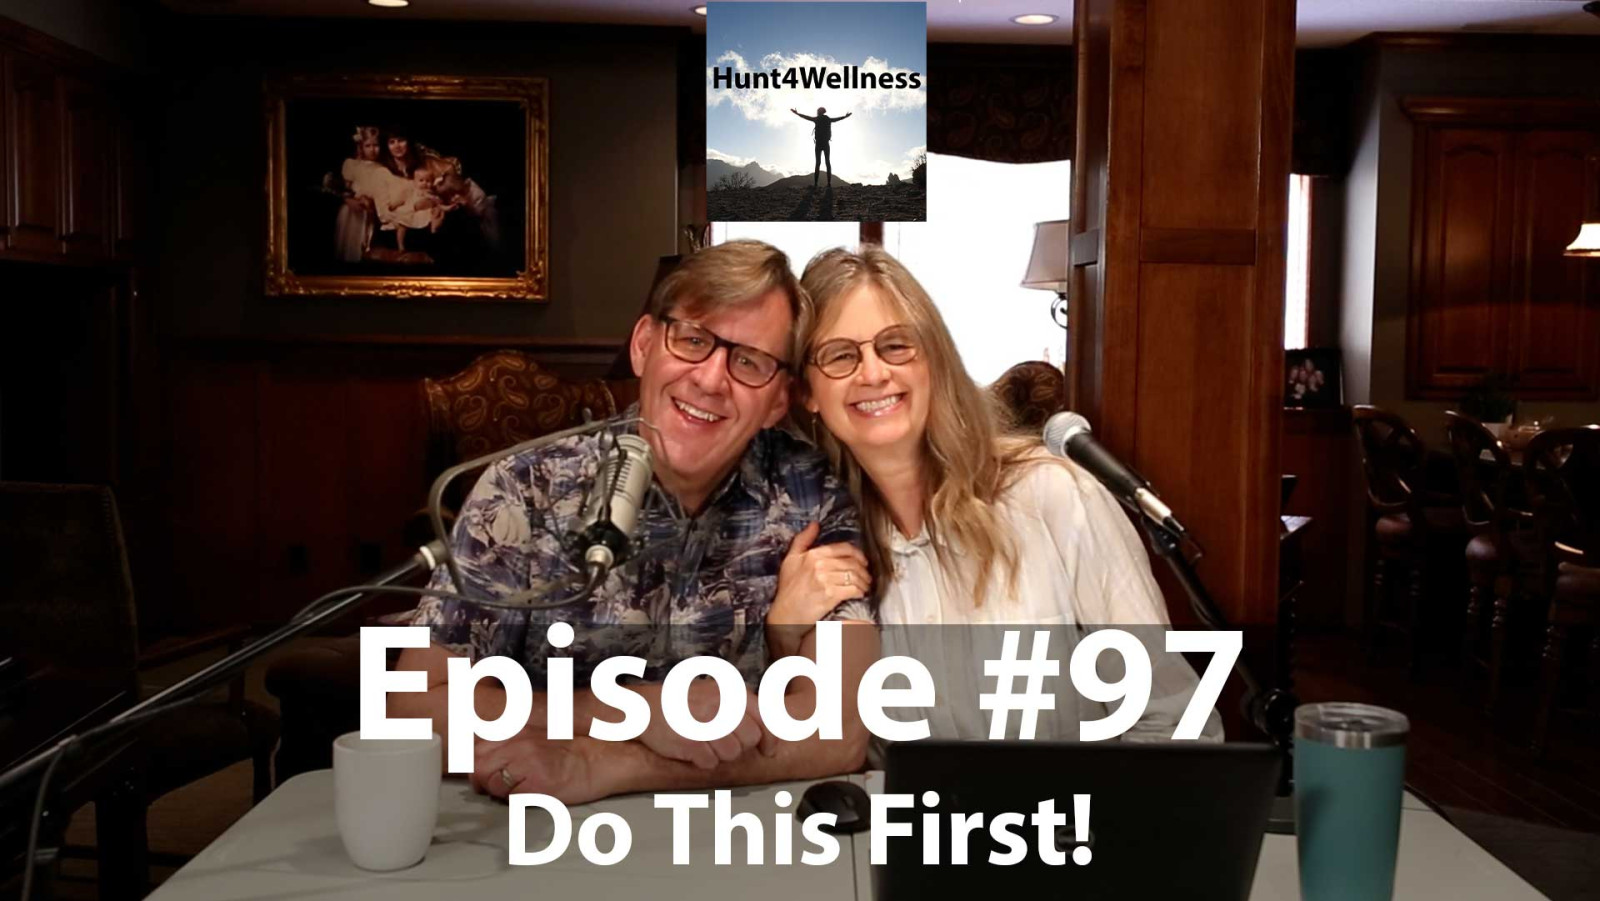 Episode #97 - Do This First!